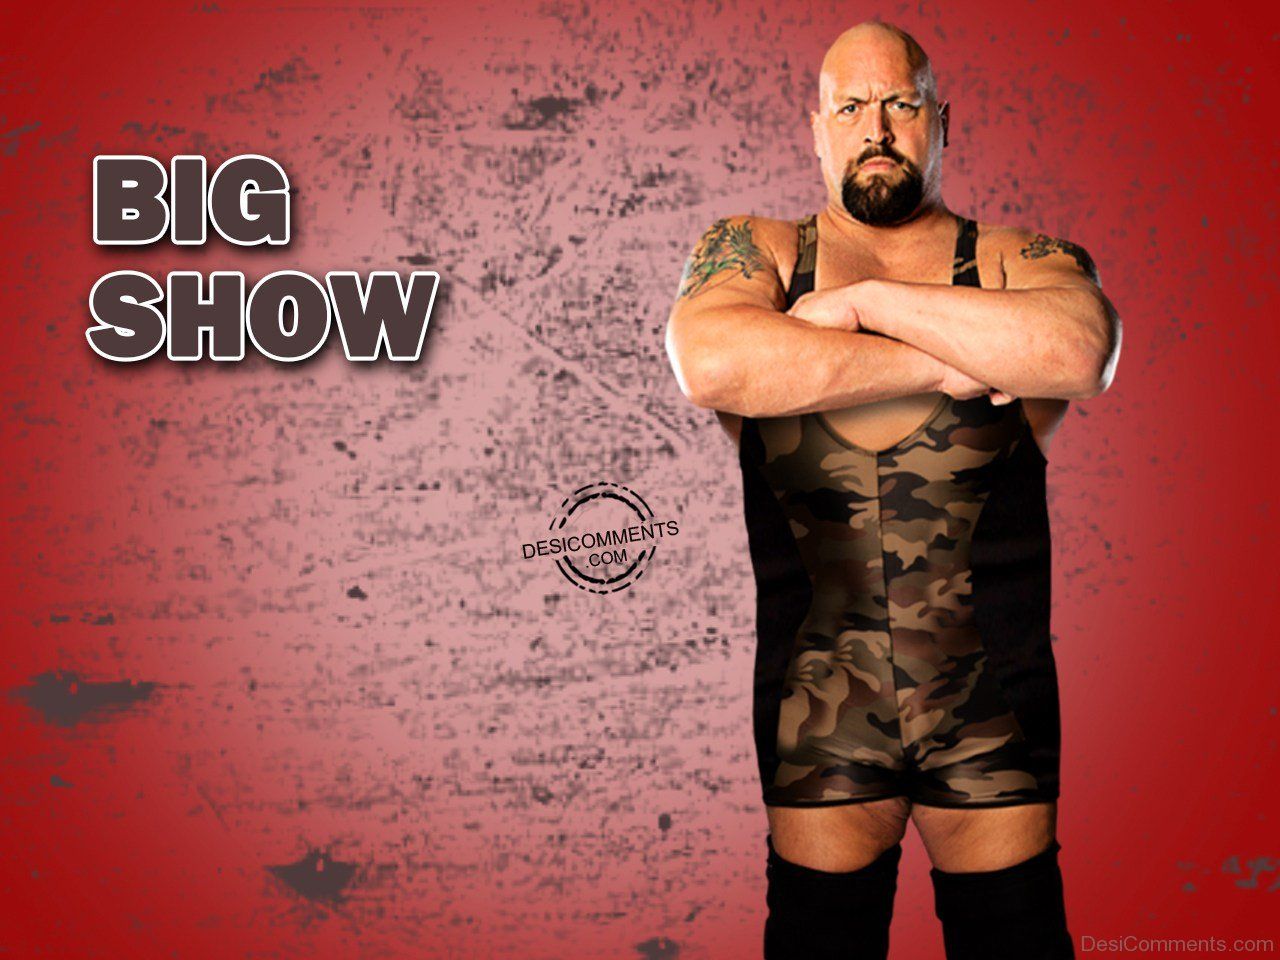 Wwe Wrestler Big Show Picture